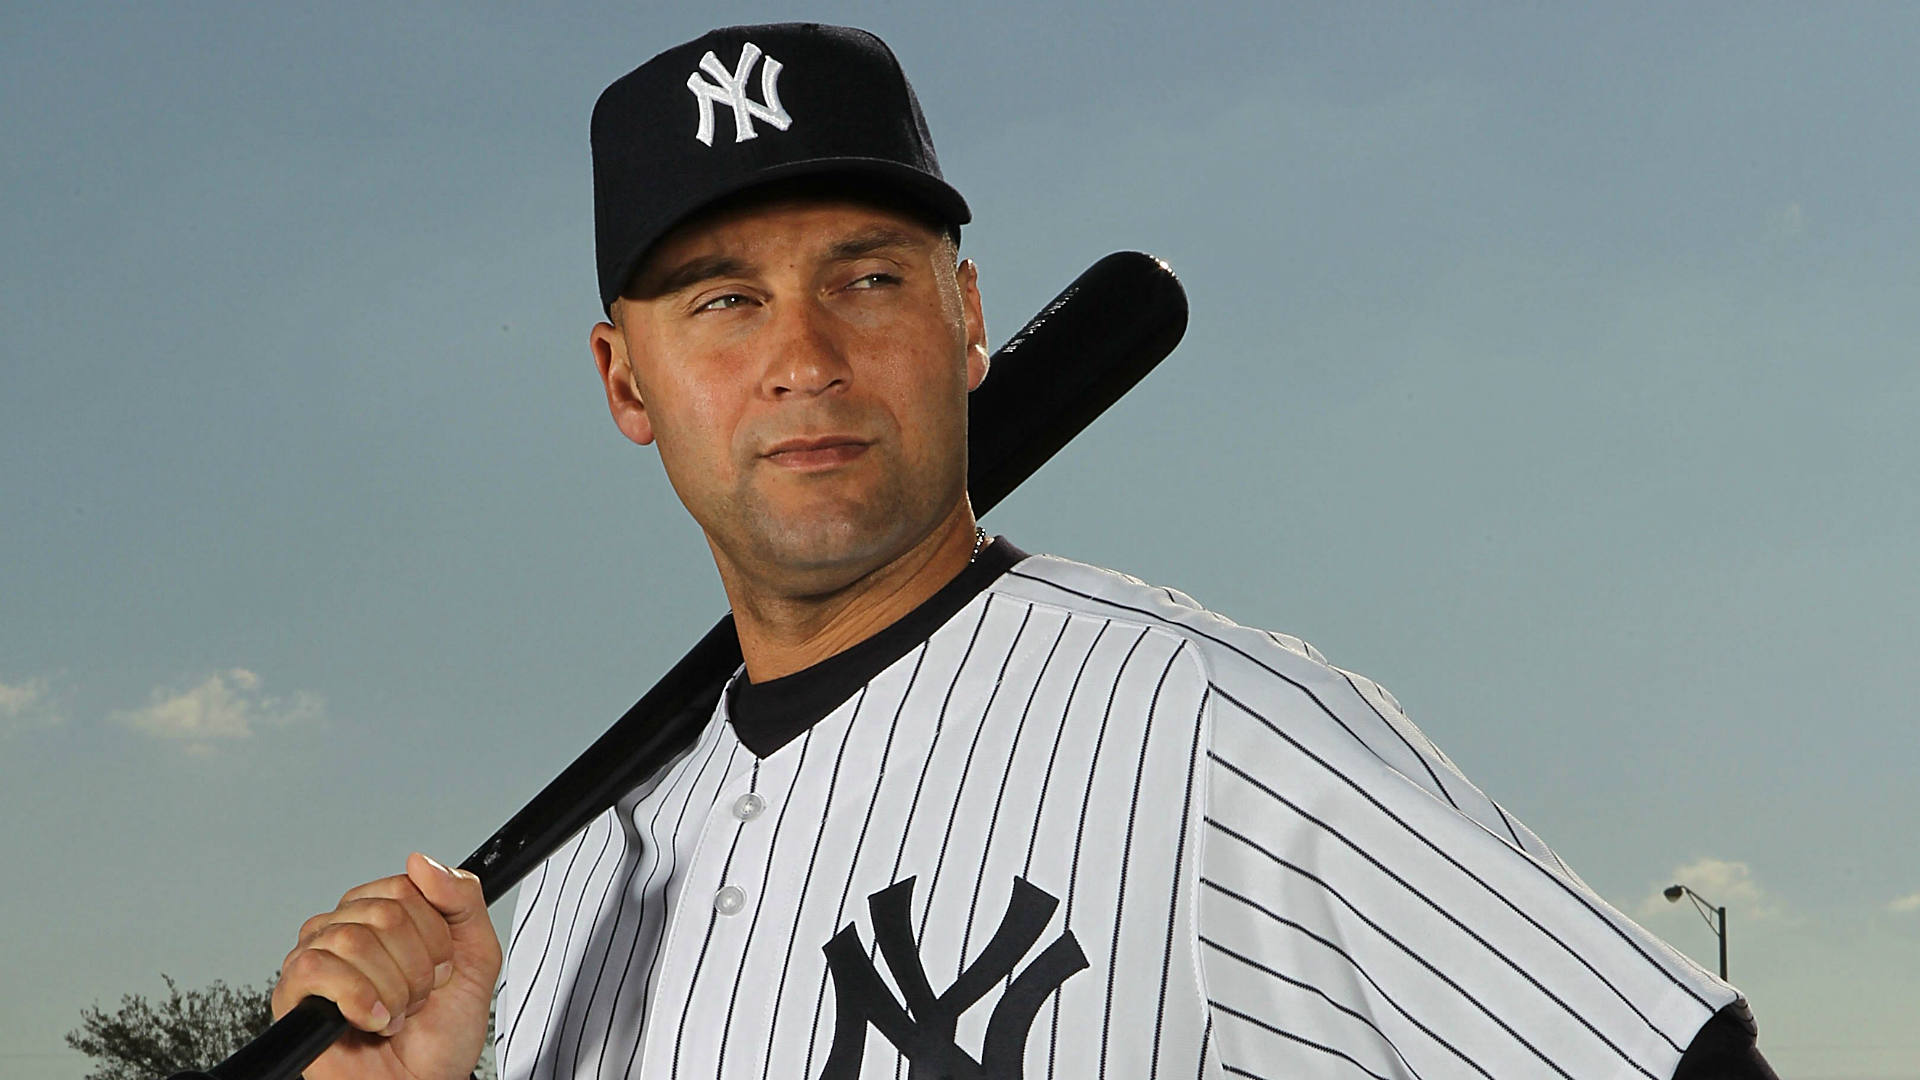 Scout who signed Jeter: ‘He was in a class by himself’ | Sporting News1920 x 1080